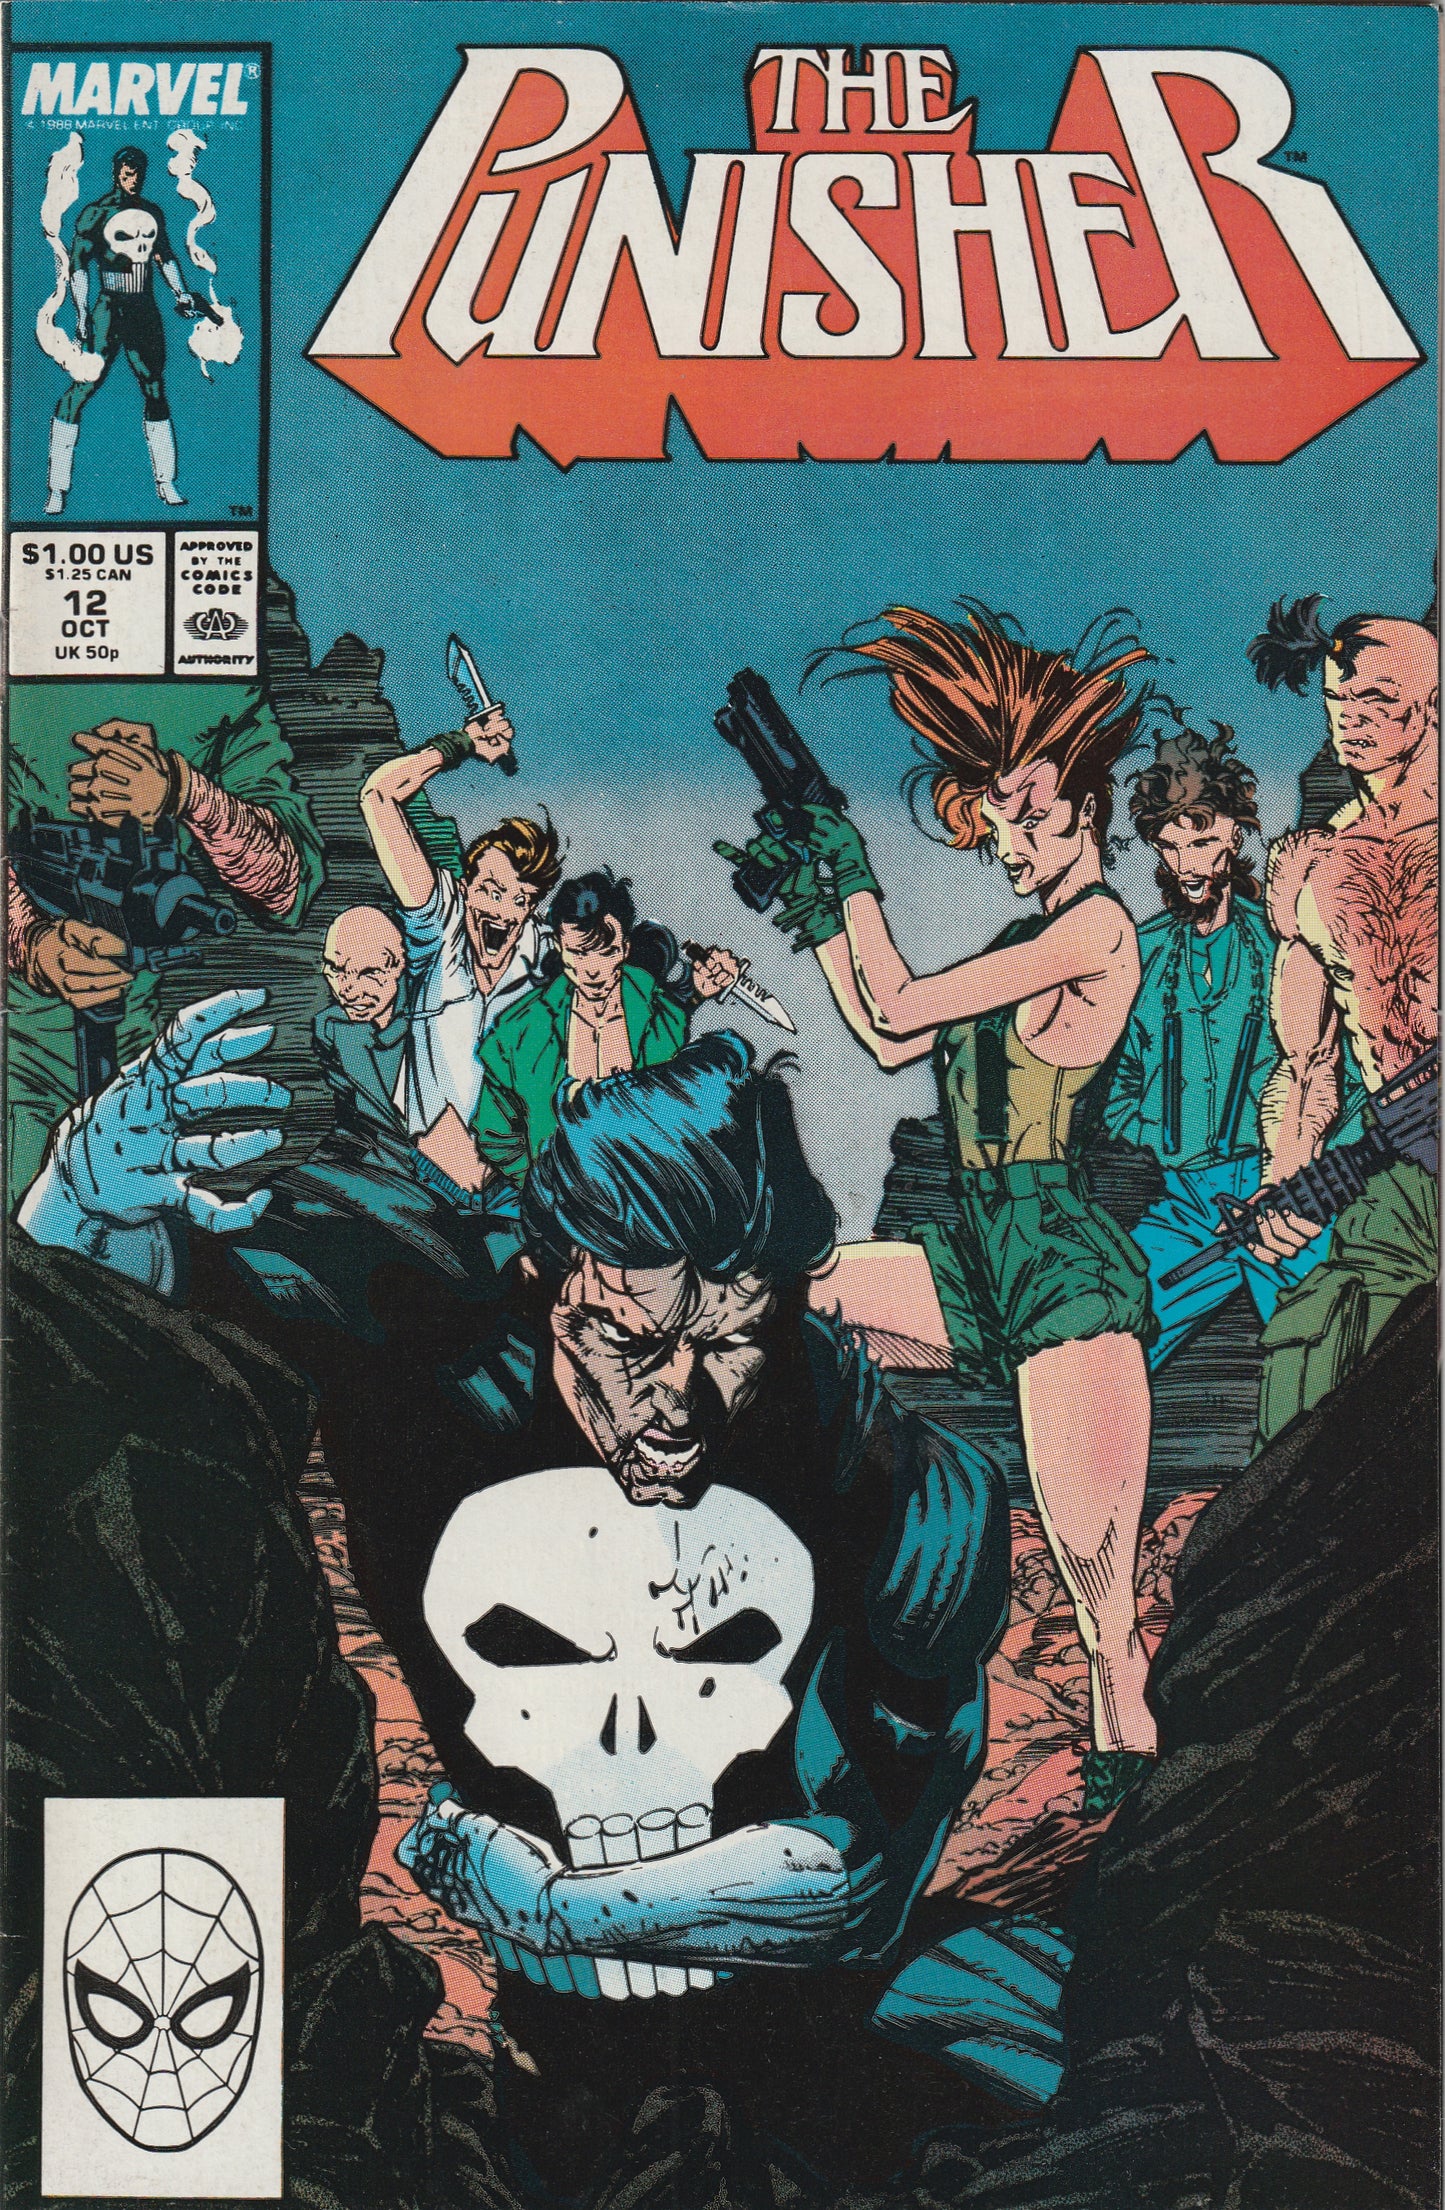 The Punisher #12 (1988)